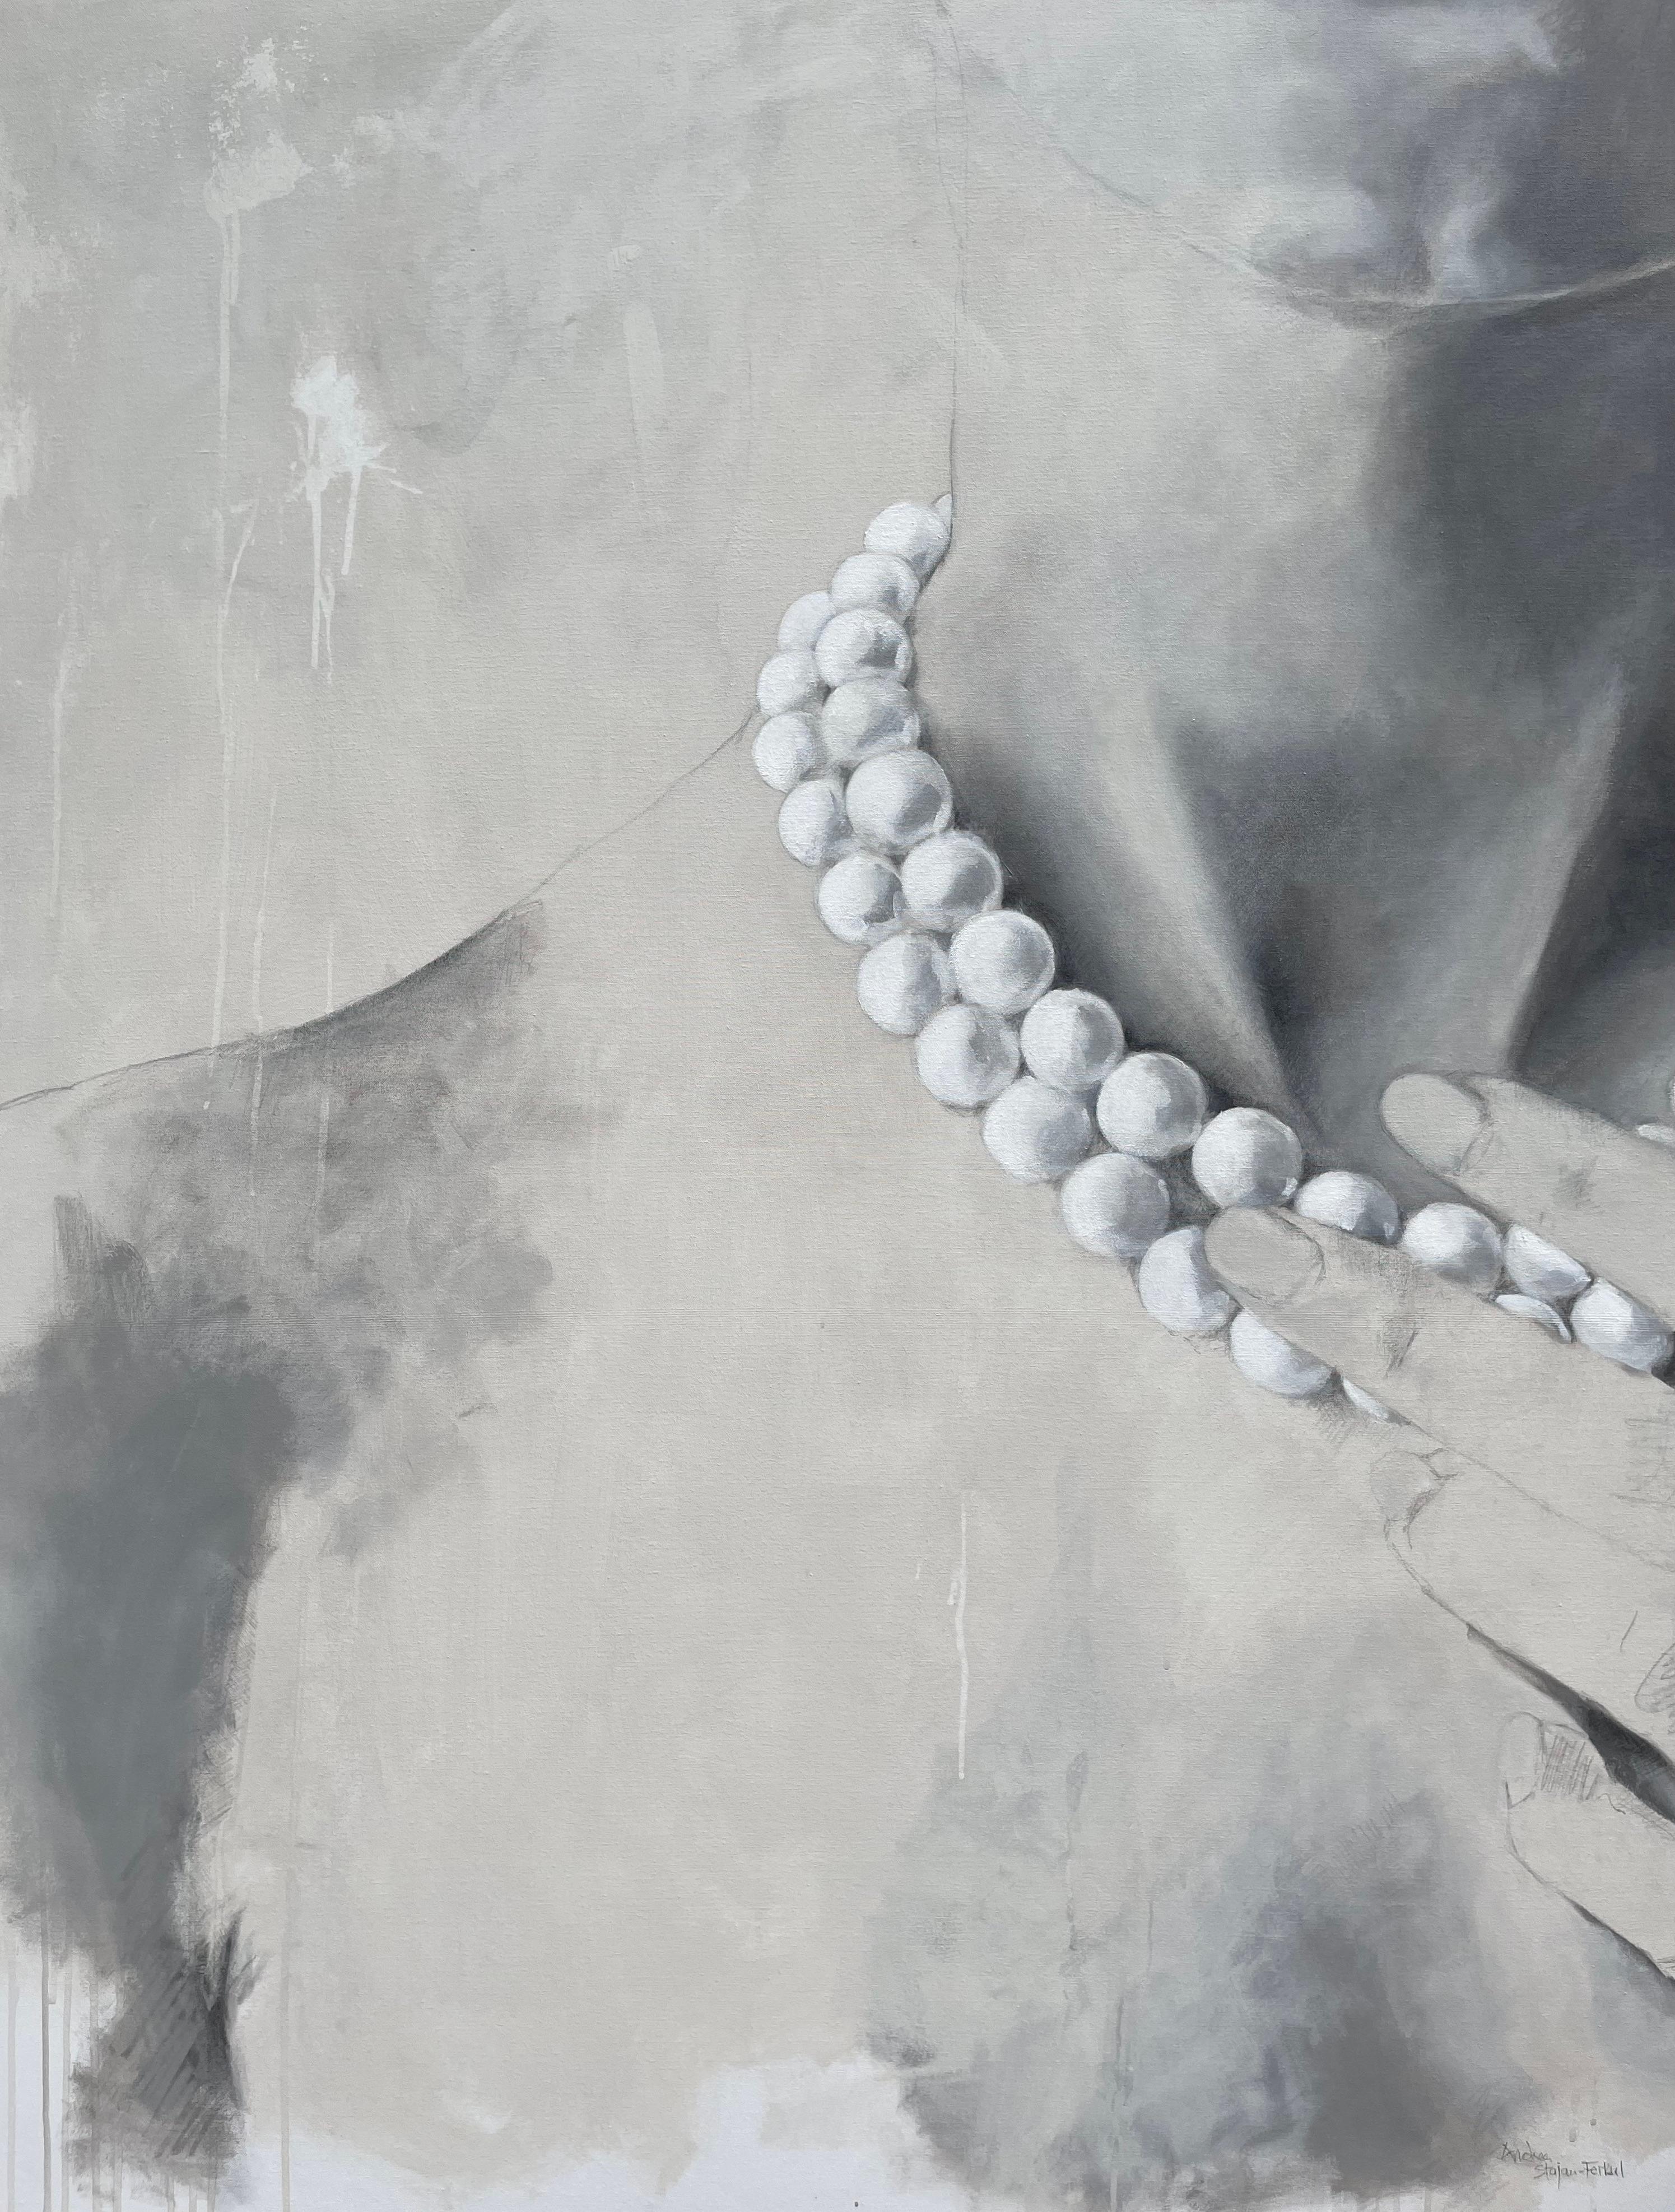 Wrap Yourself Around Me, 48"x60", Pearls, Acrylic, Pencil, White, Beige Painting